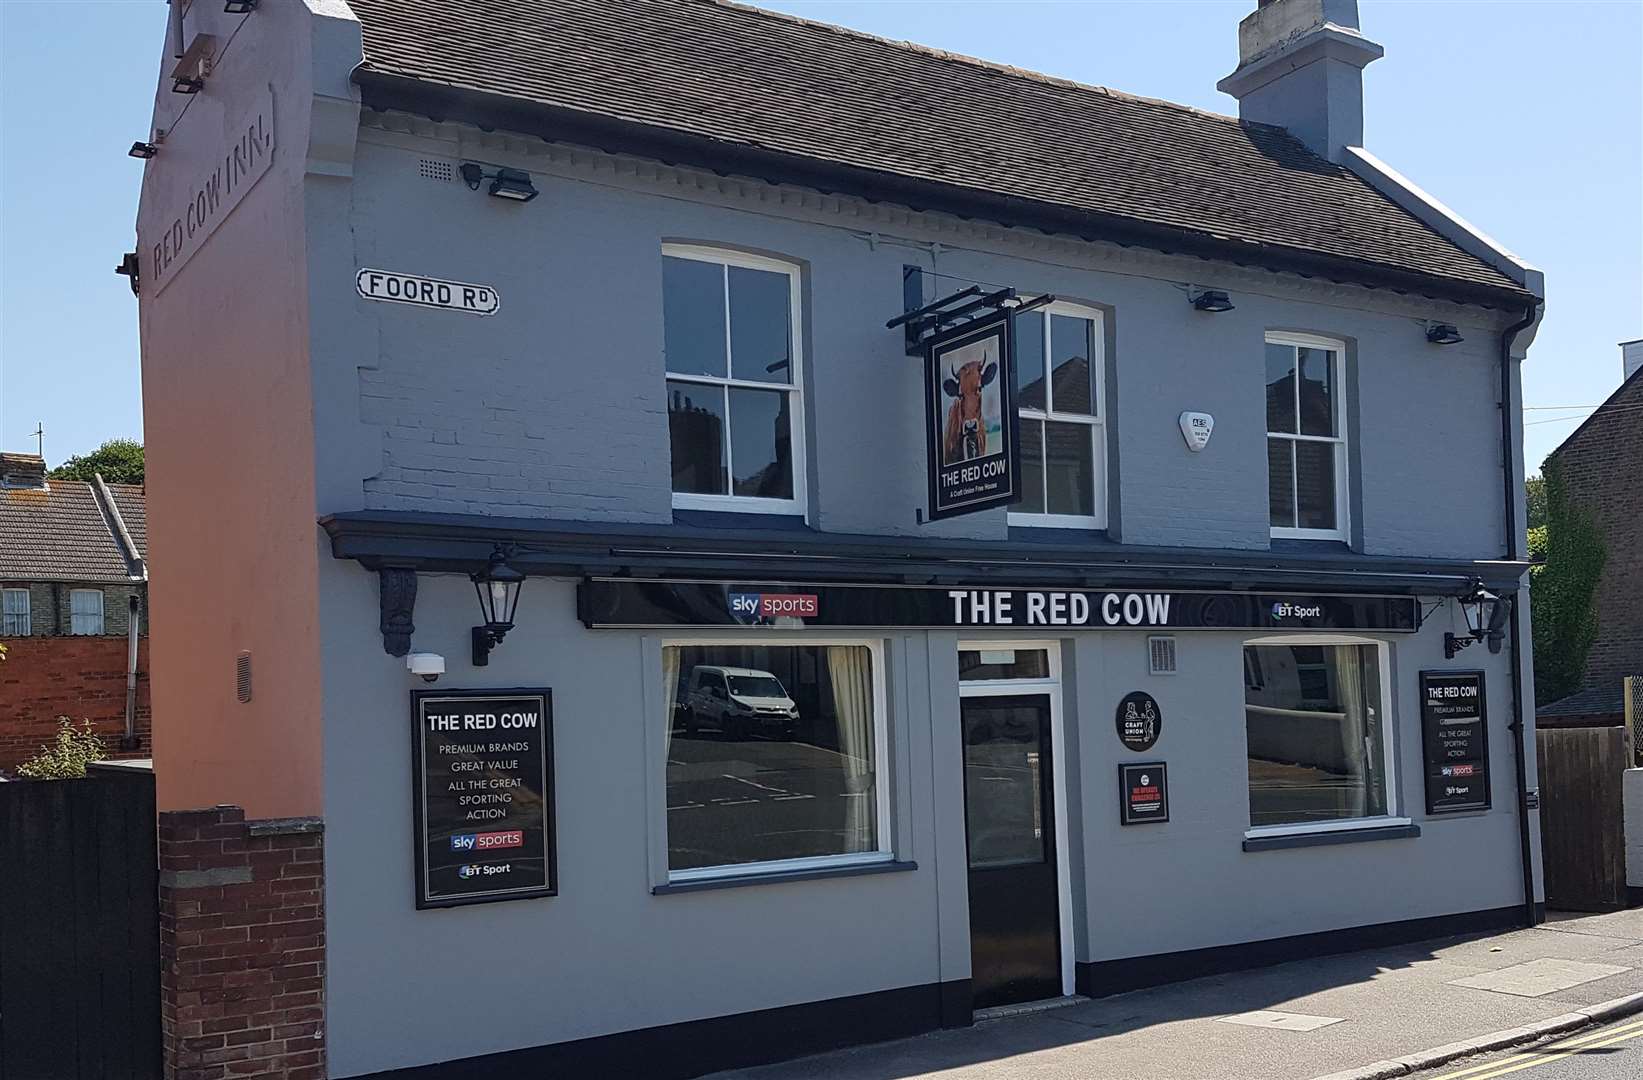 The Red Cow pub has re-opened with a new look